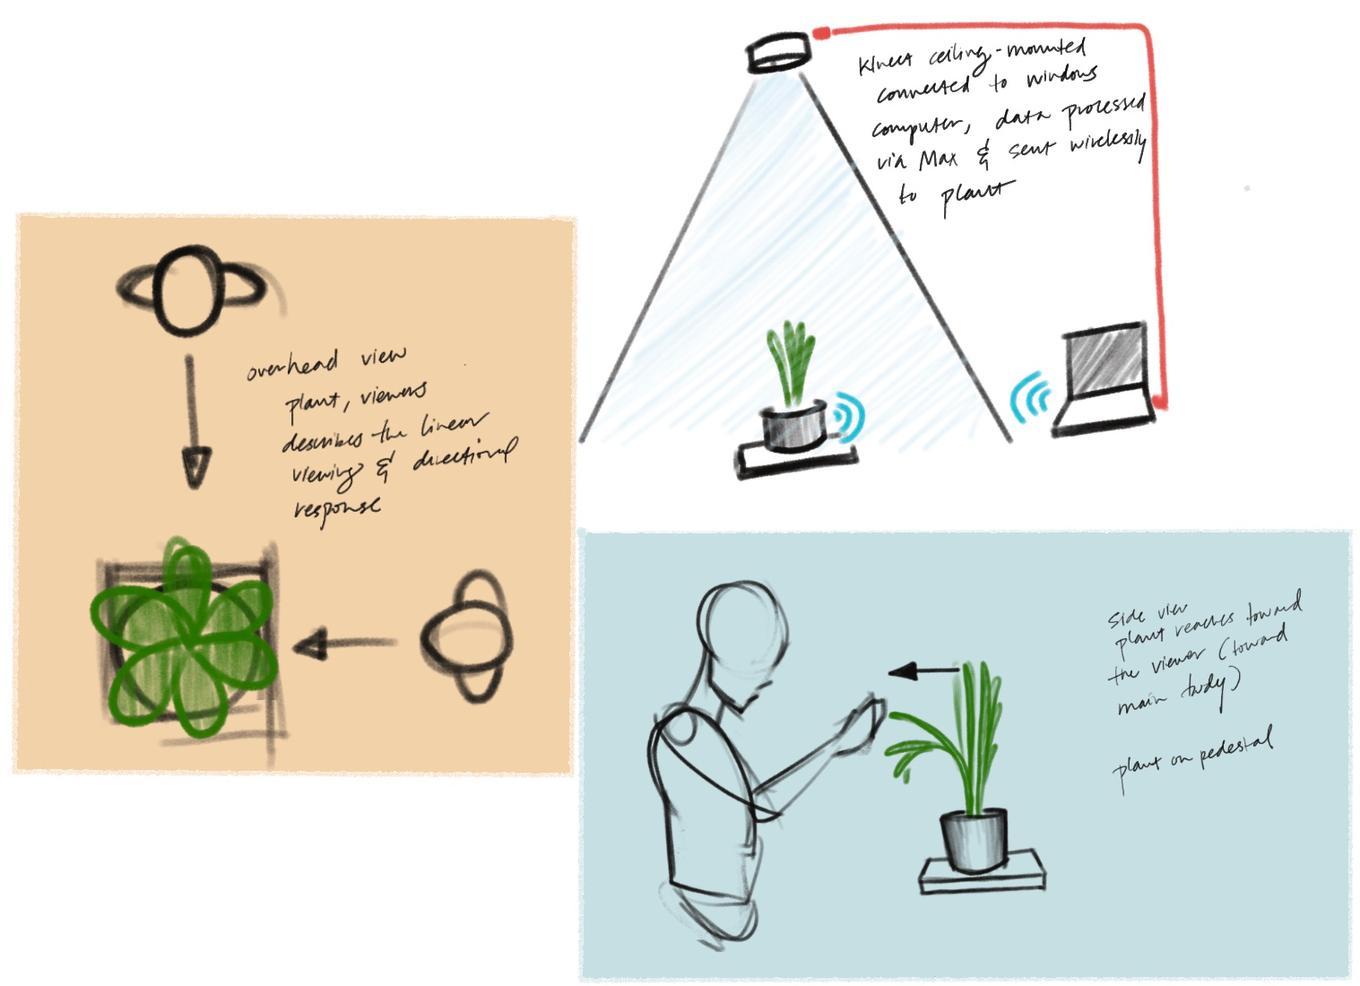 Sketches including birds-eye and side view of planned interaction with plant.